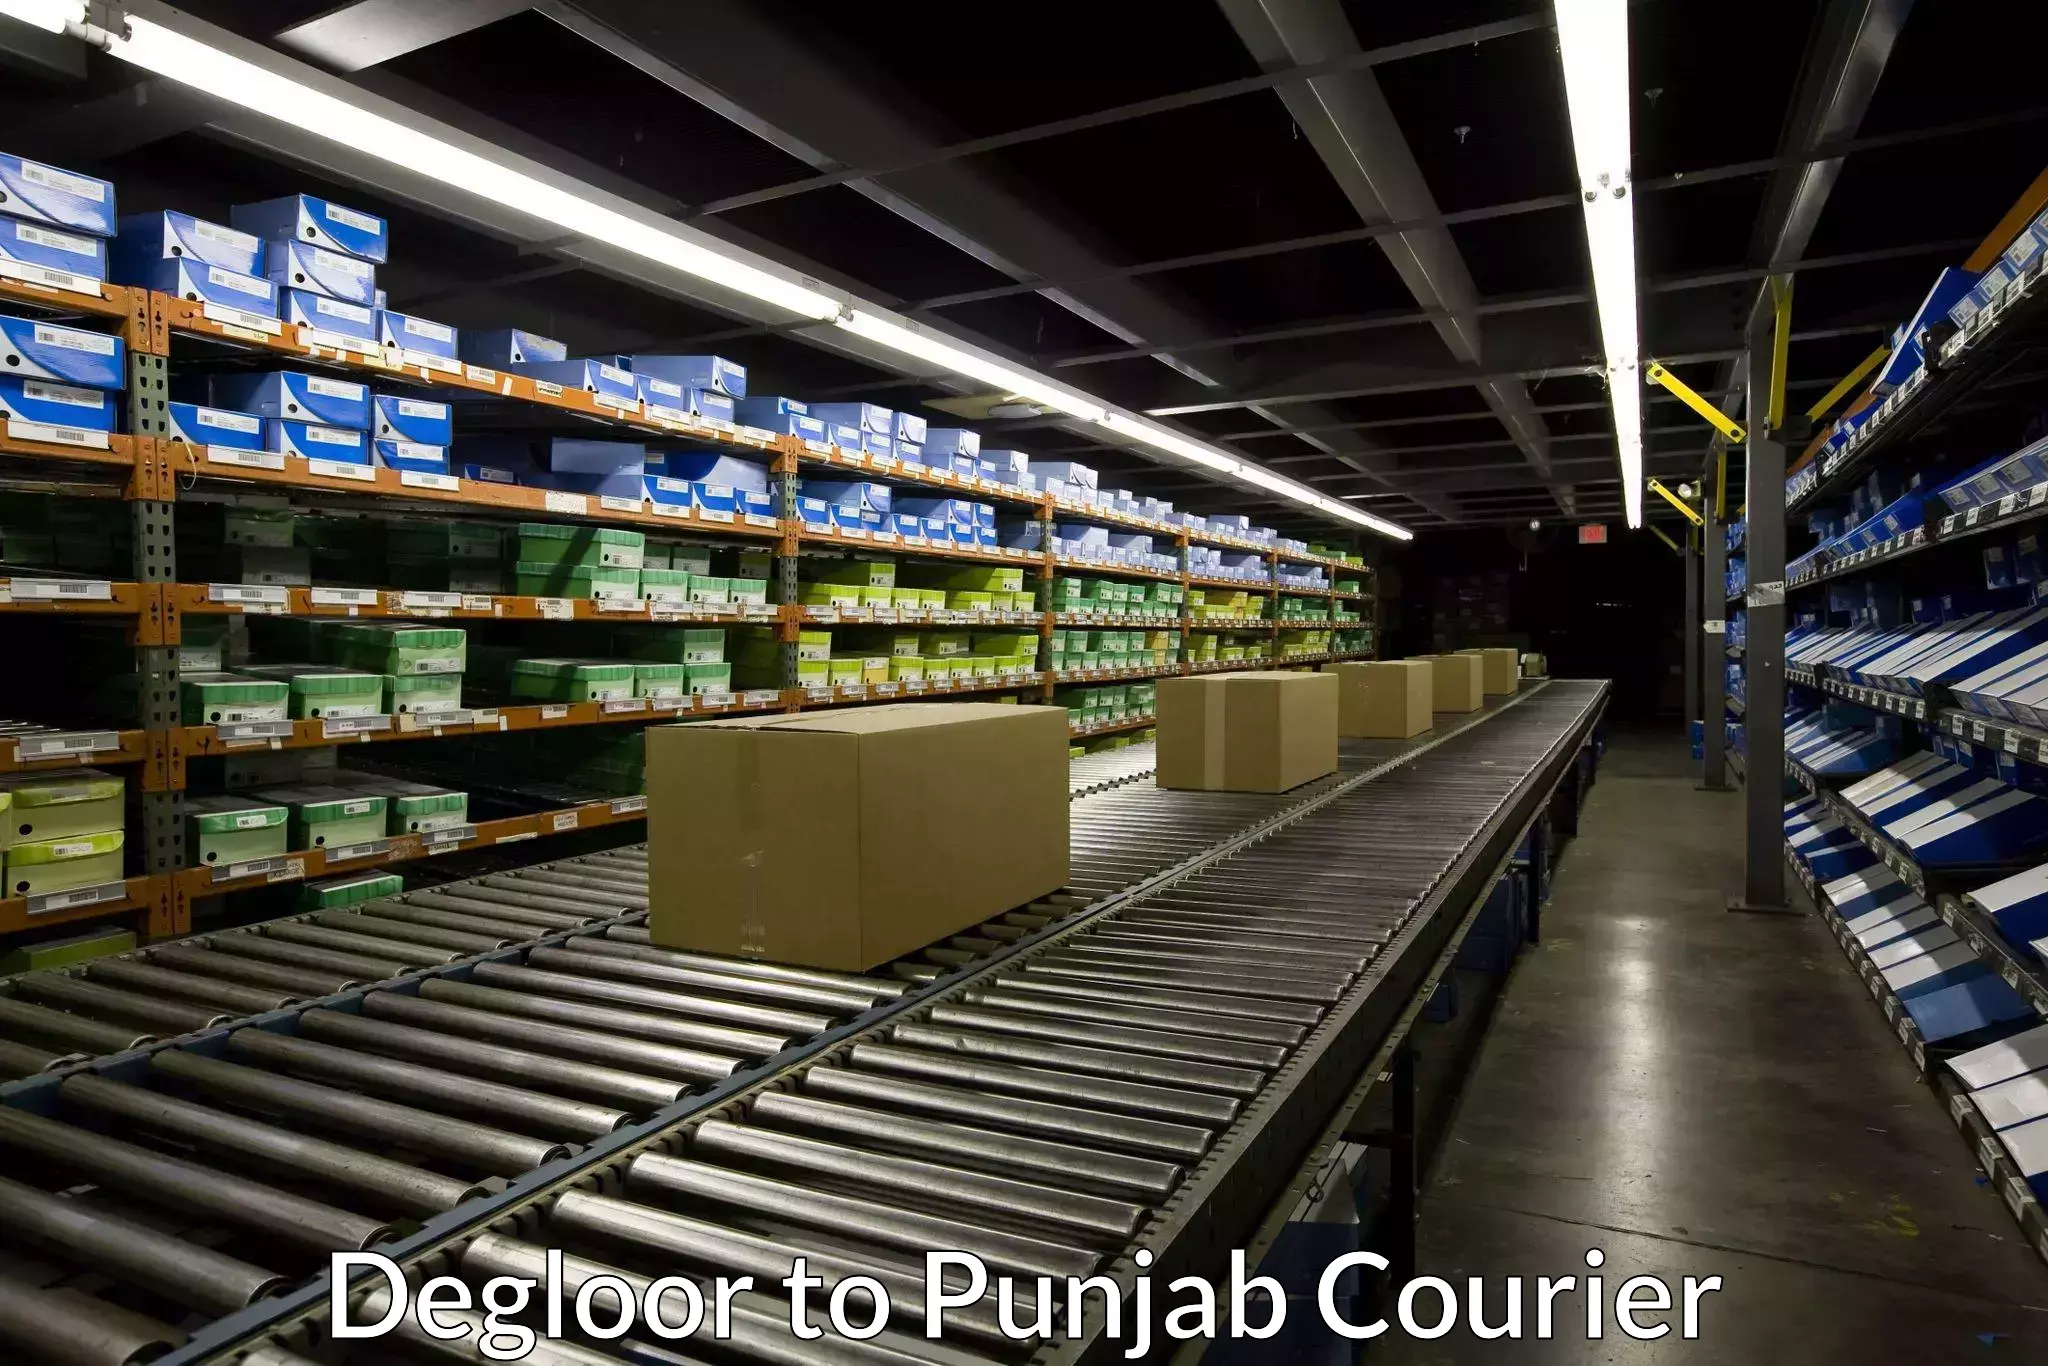 Online package tracking in Degloor to Punjab